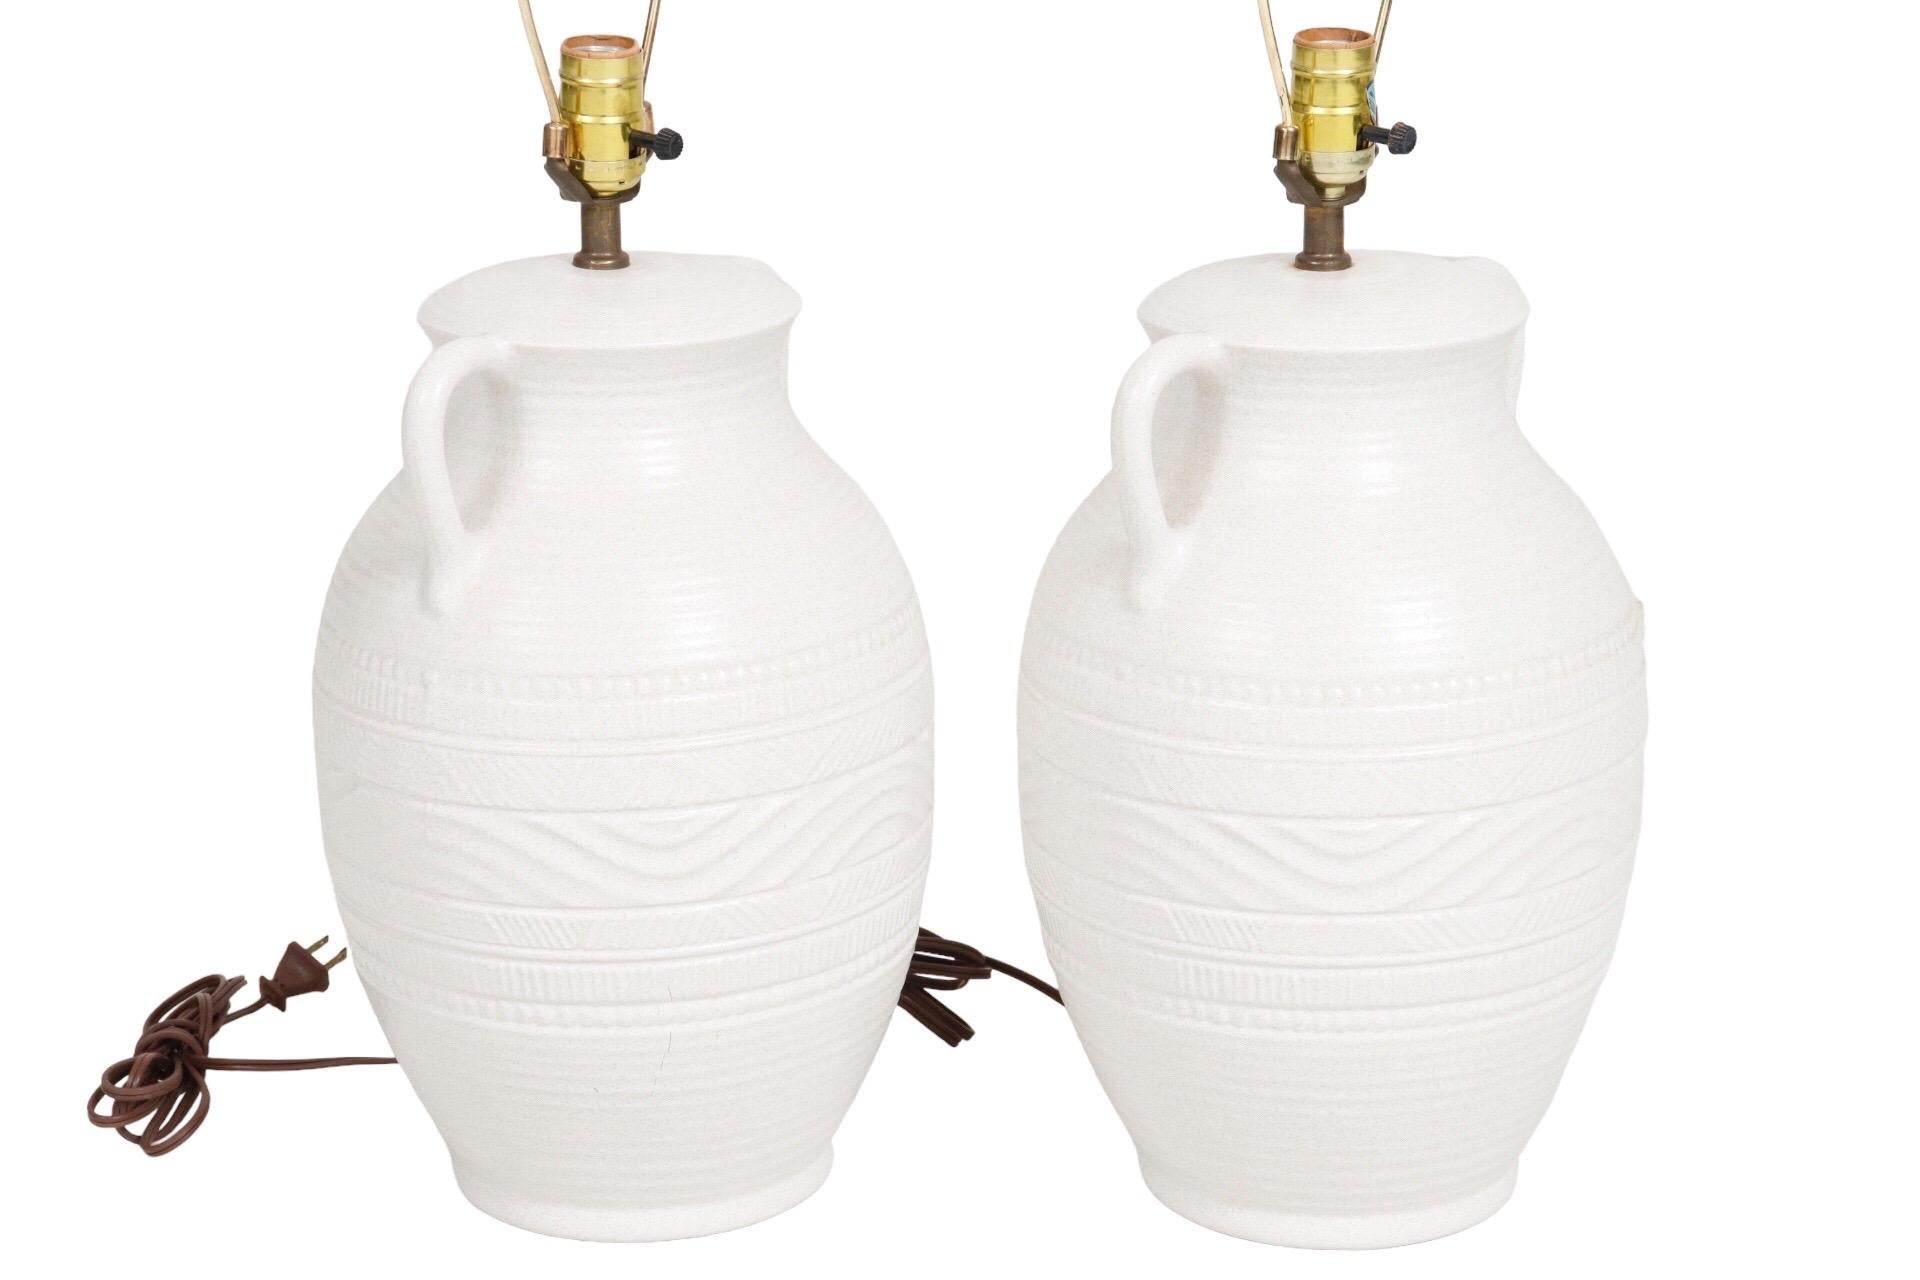 White Ceramic Amphora Table Lamps, a Pair In Good Condition For Sale In Bradenton, FL